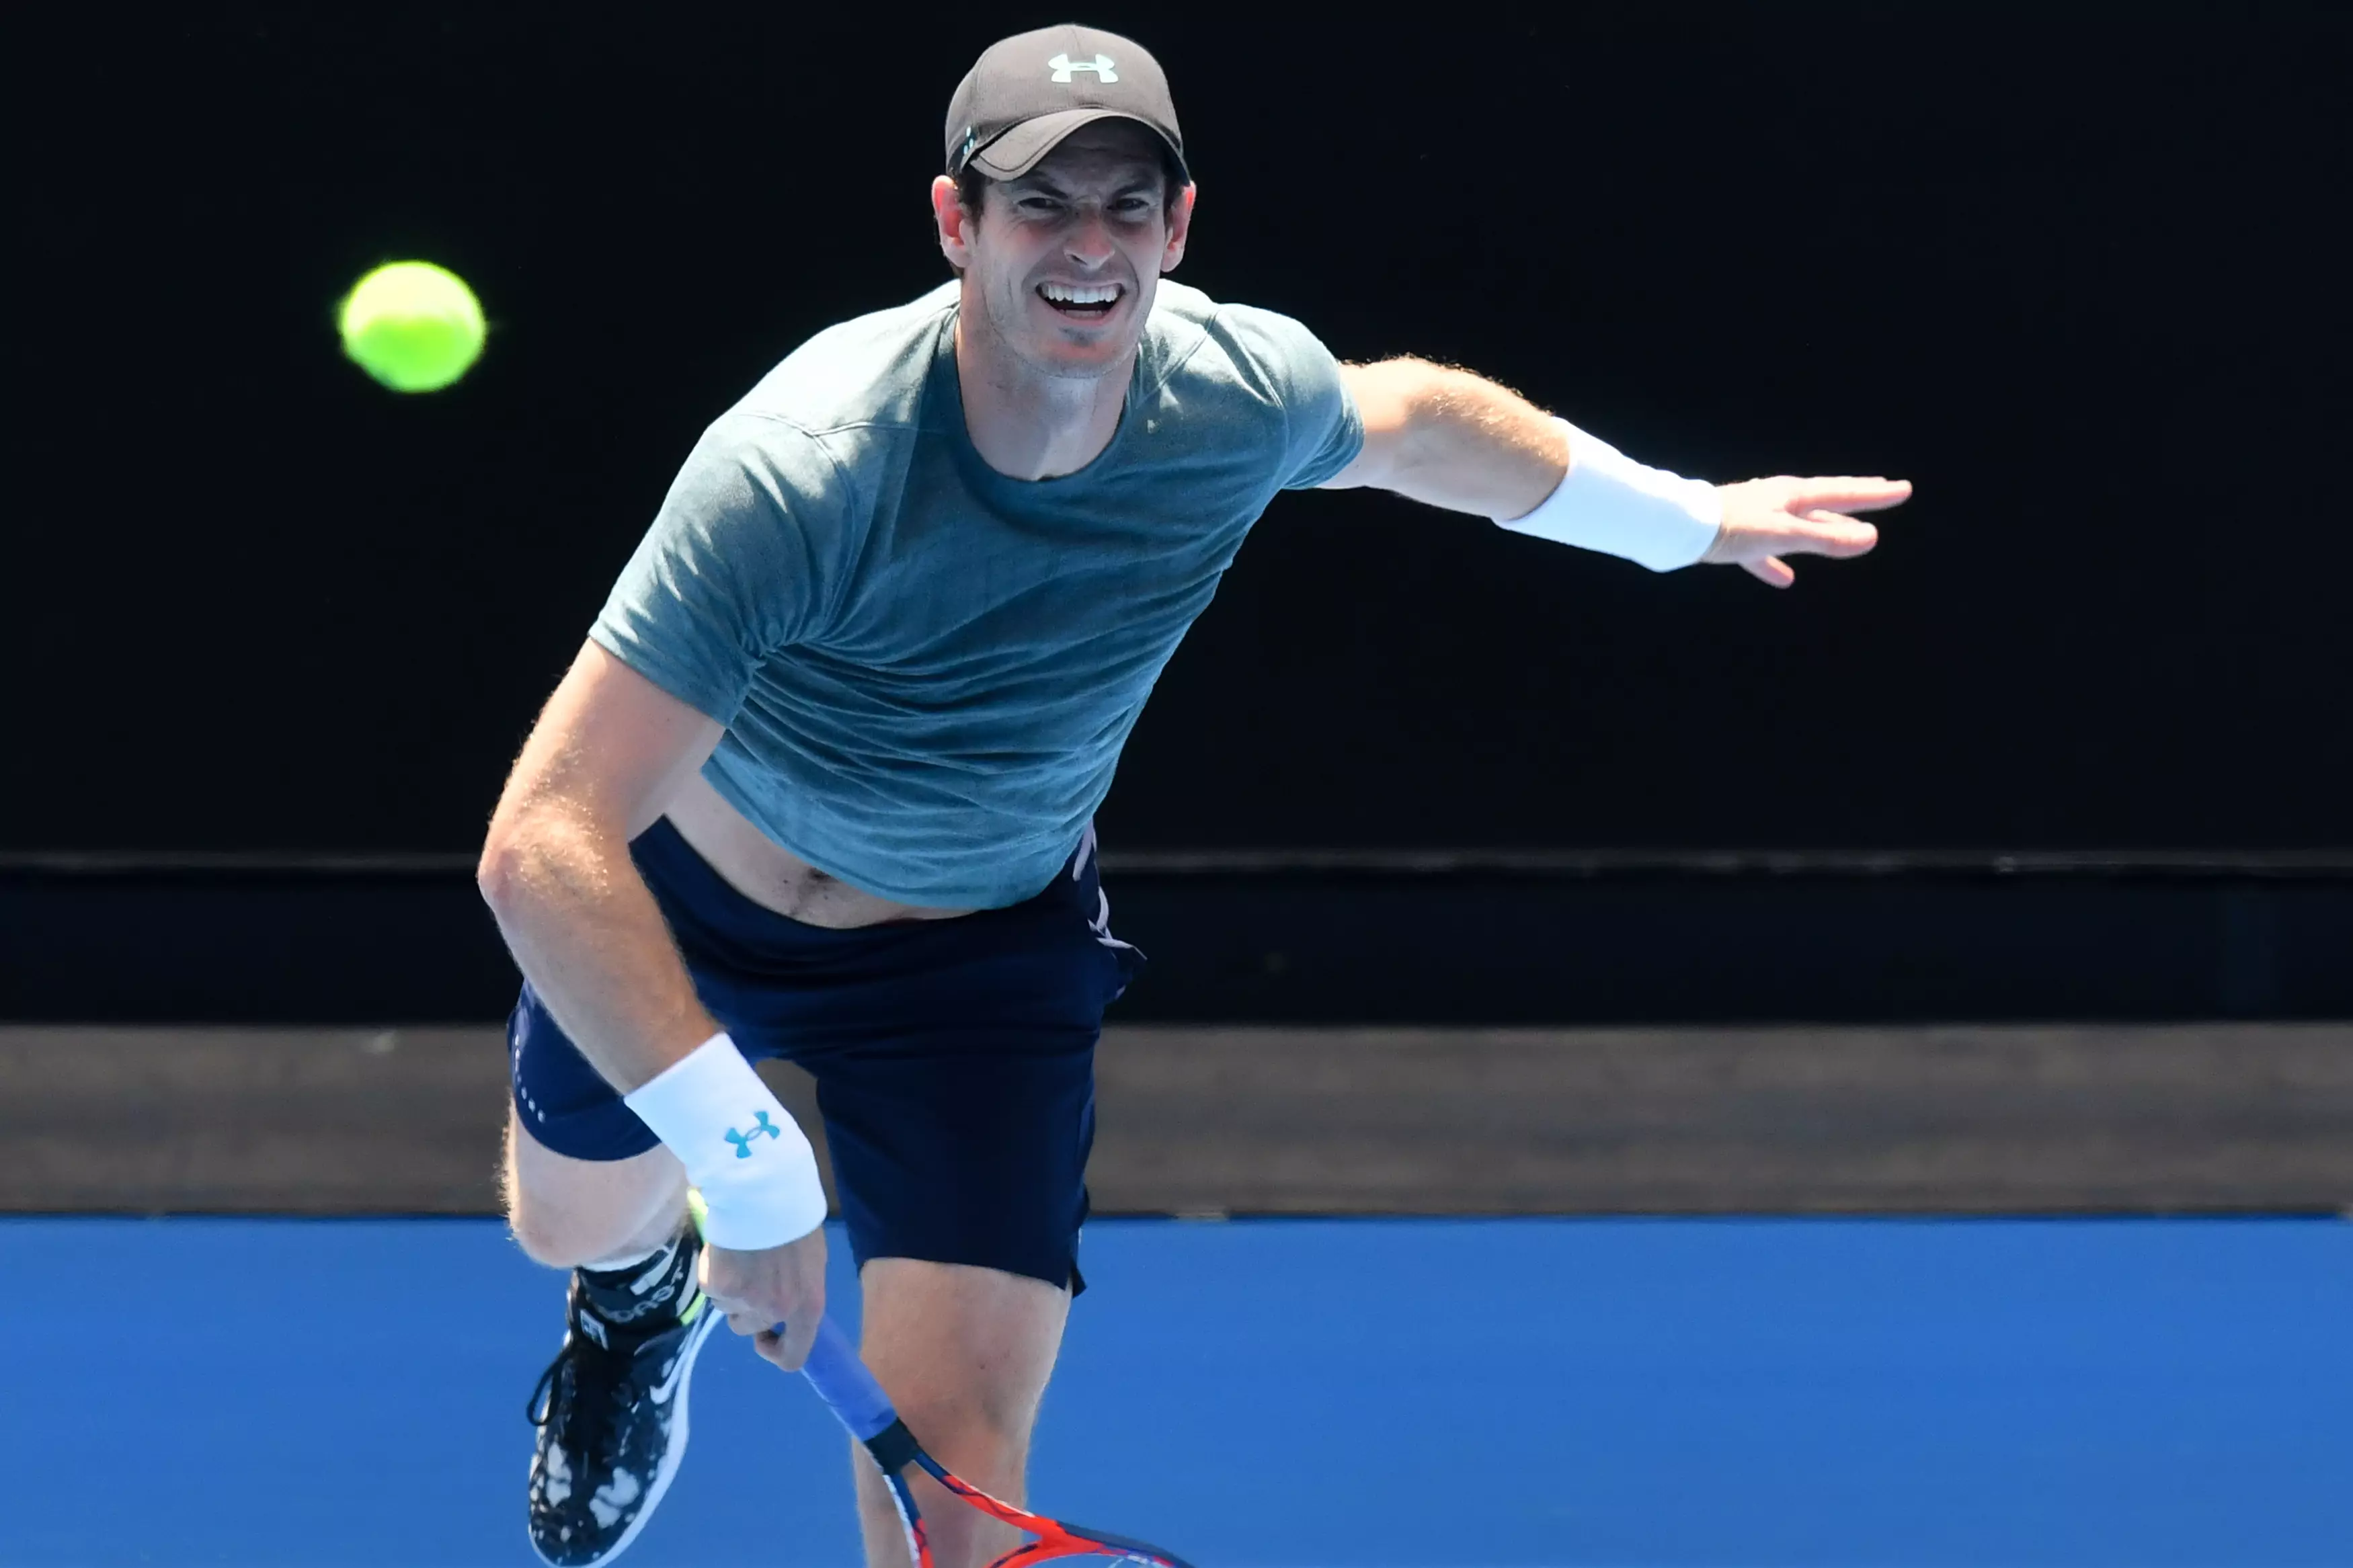 His practice match ahead of the Australian Open didn't help his condition.